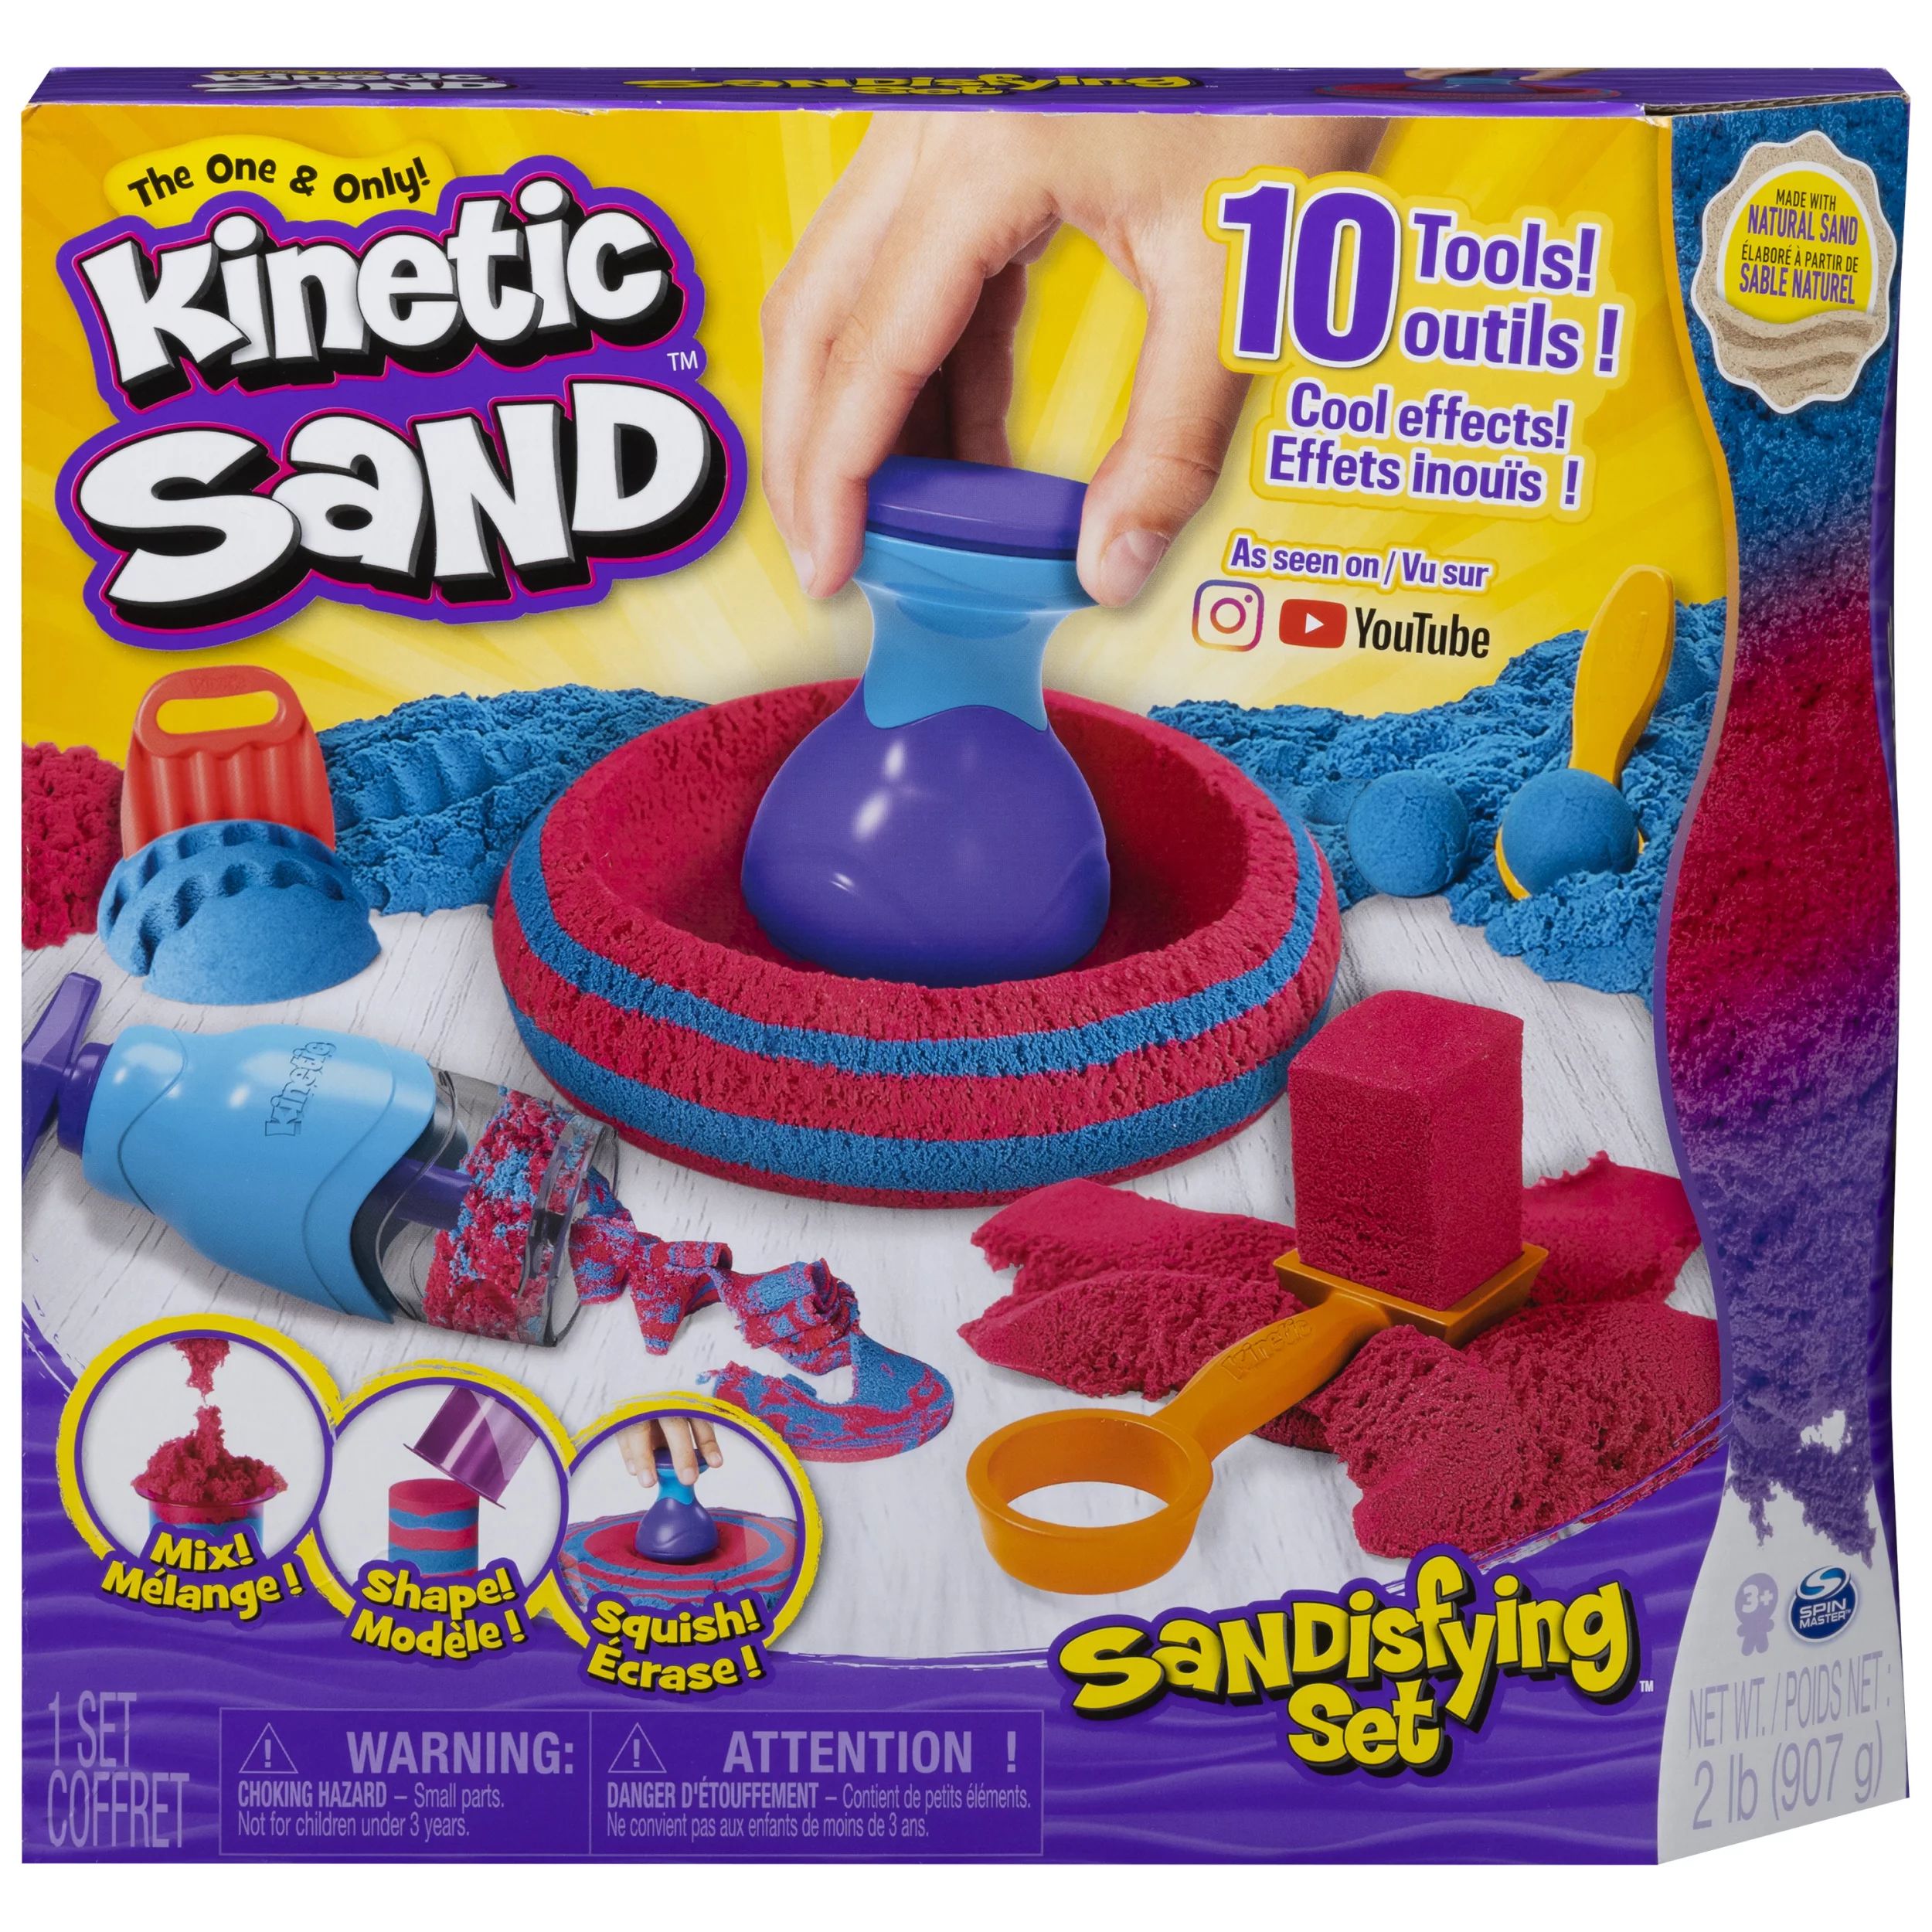 Kinetic Sand, Sandisfying Set with 2lbs of Sand and 10 Tools, for Kids Aged 3 and up | Walmart (US)